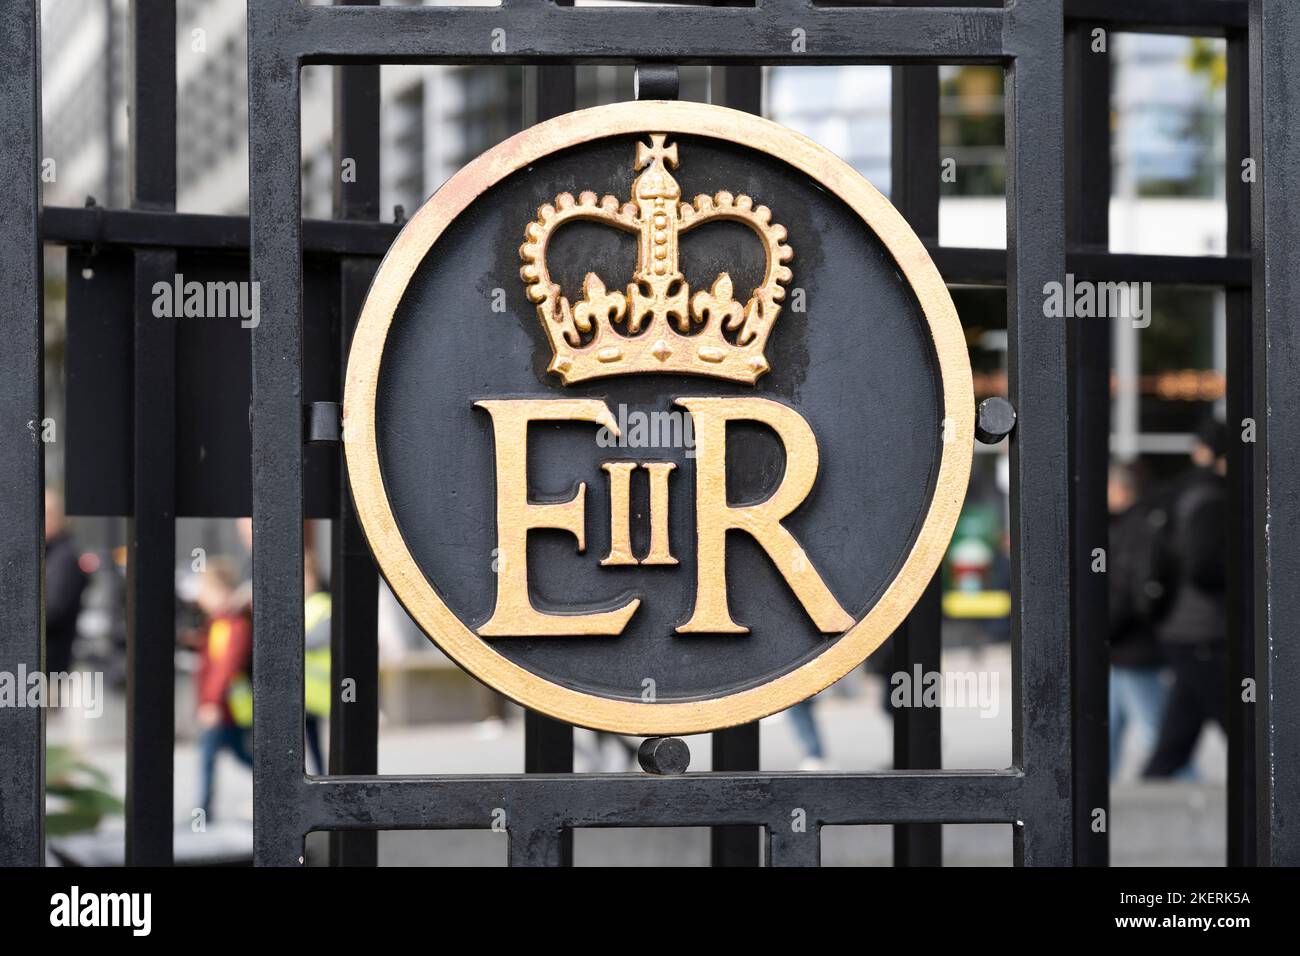 ER in black and gold paint - Elizabeth II Regina (EIIR), the royal cypher of Queen Elizabeth II, on a gate outside the Tower of London, England Stock Photo